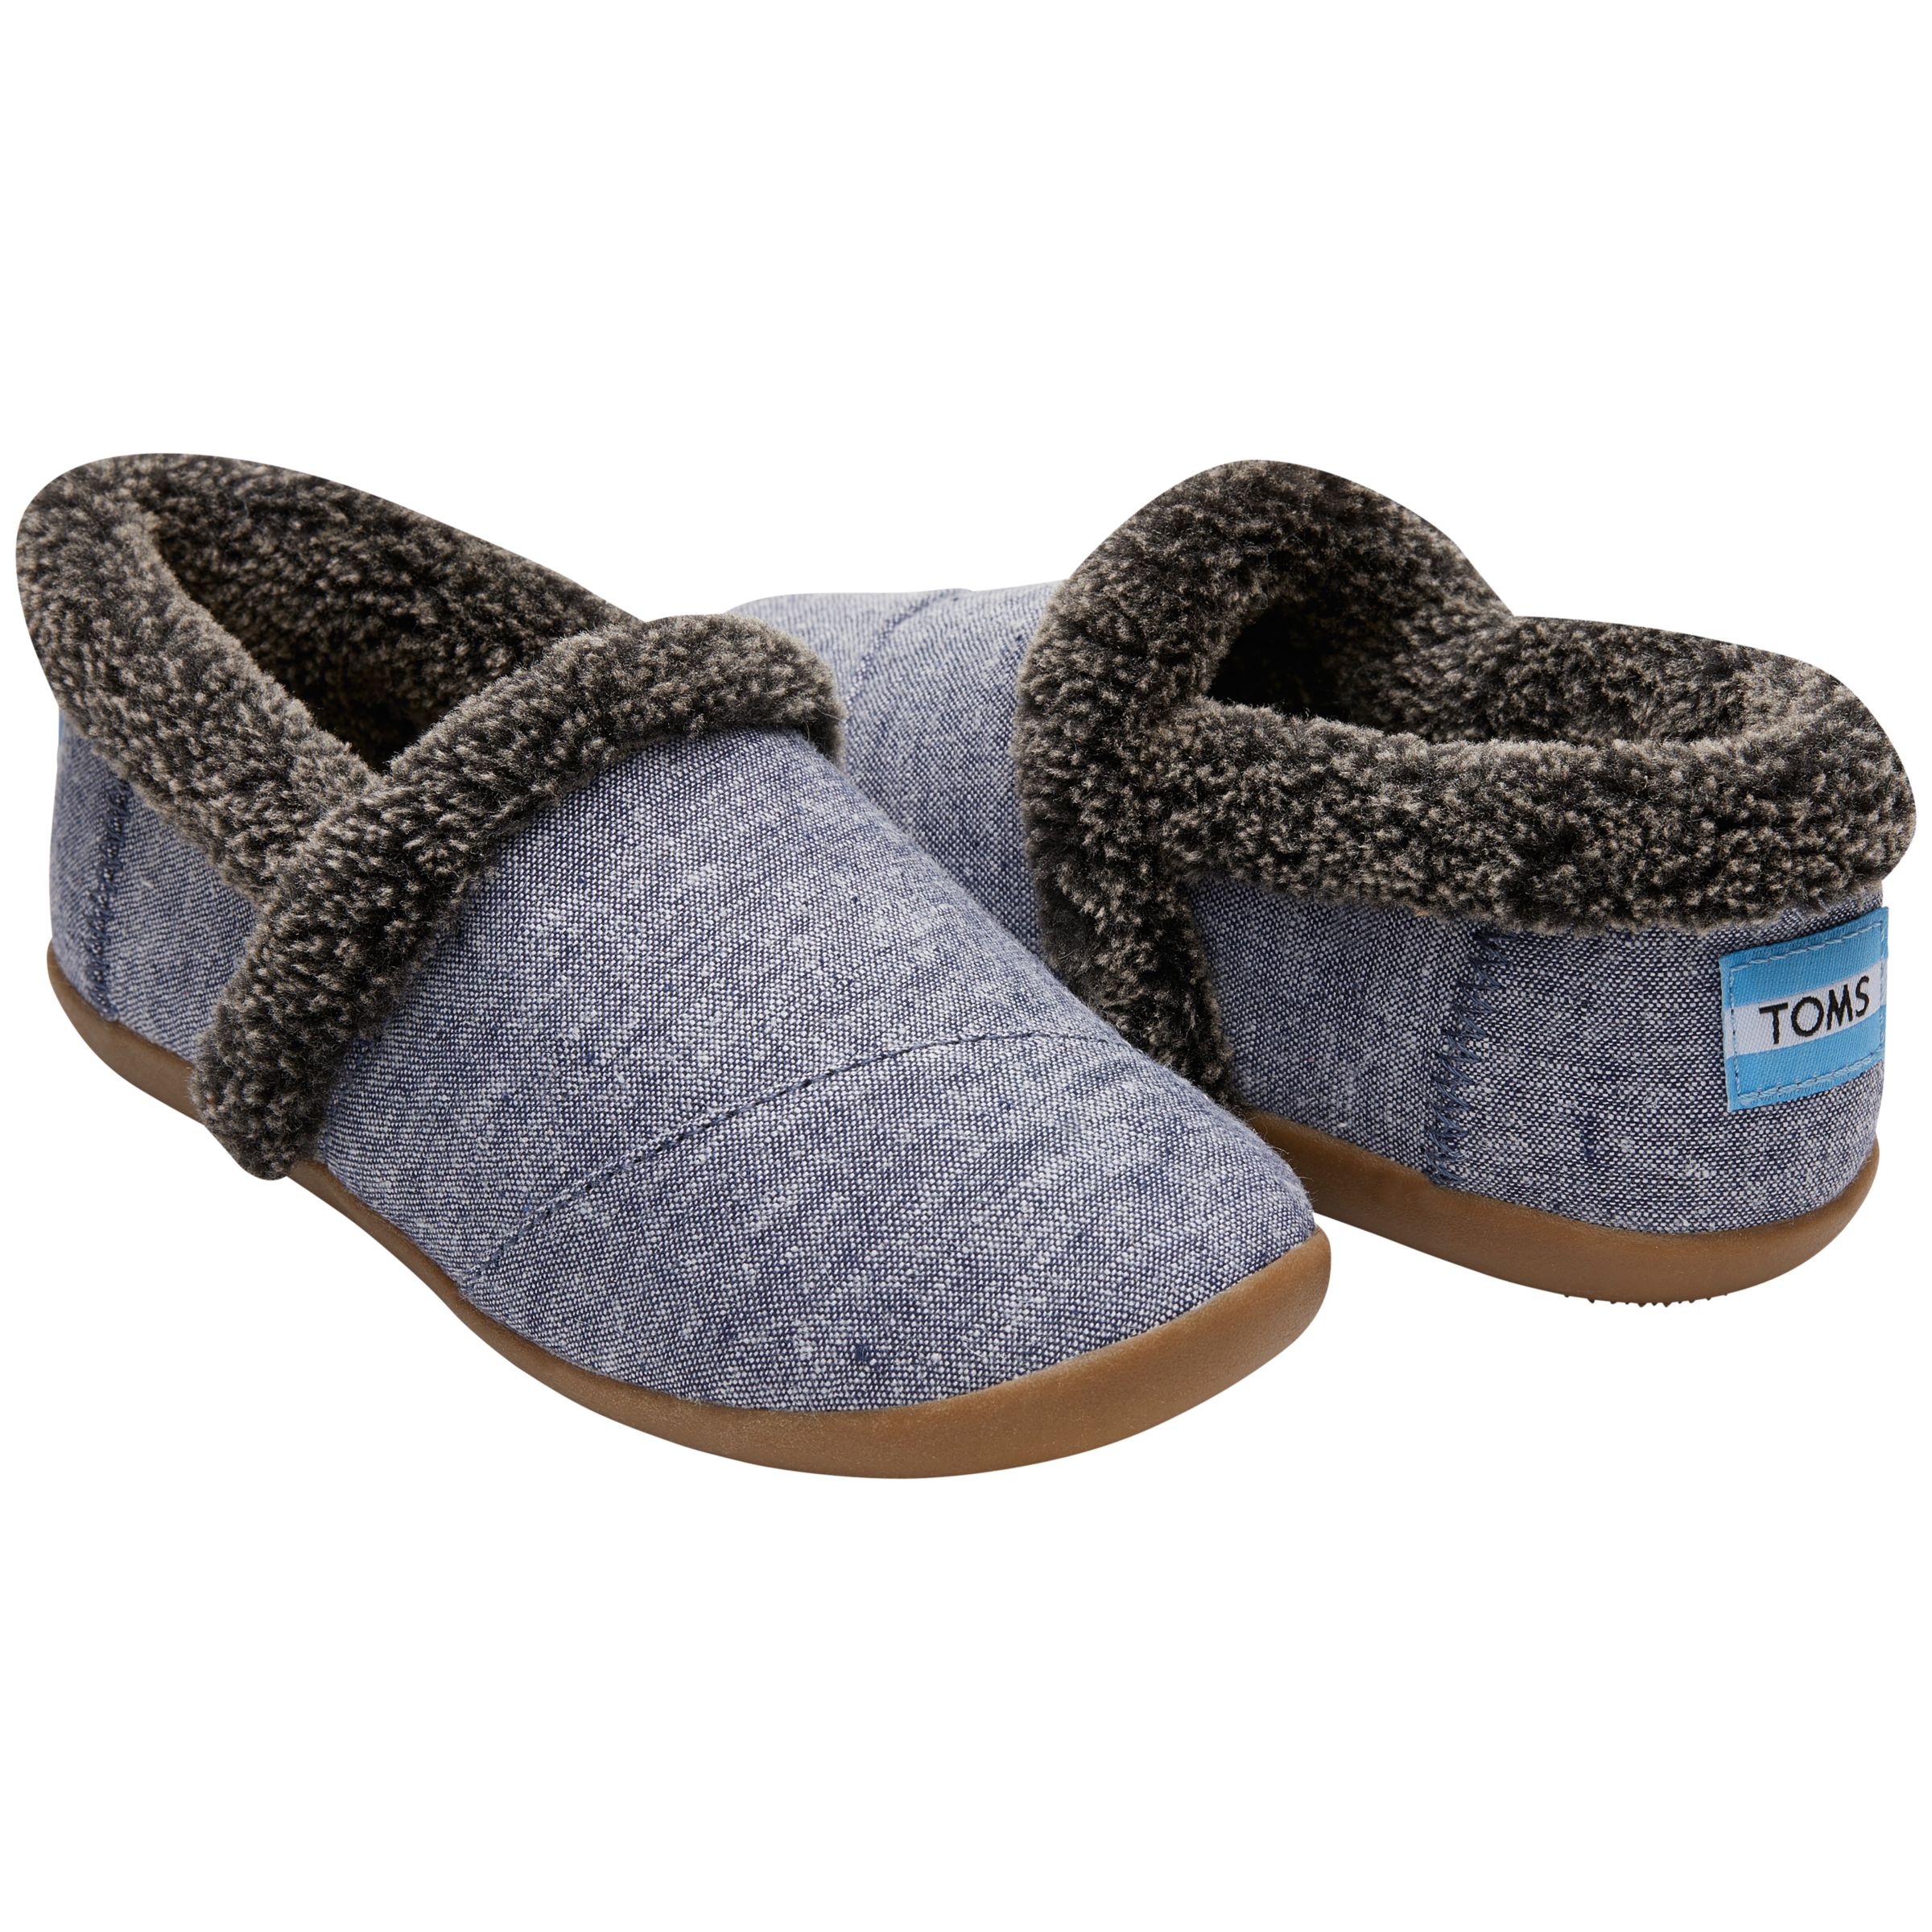 TOMS House Slippers, Chambray, 6 Jnr